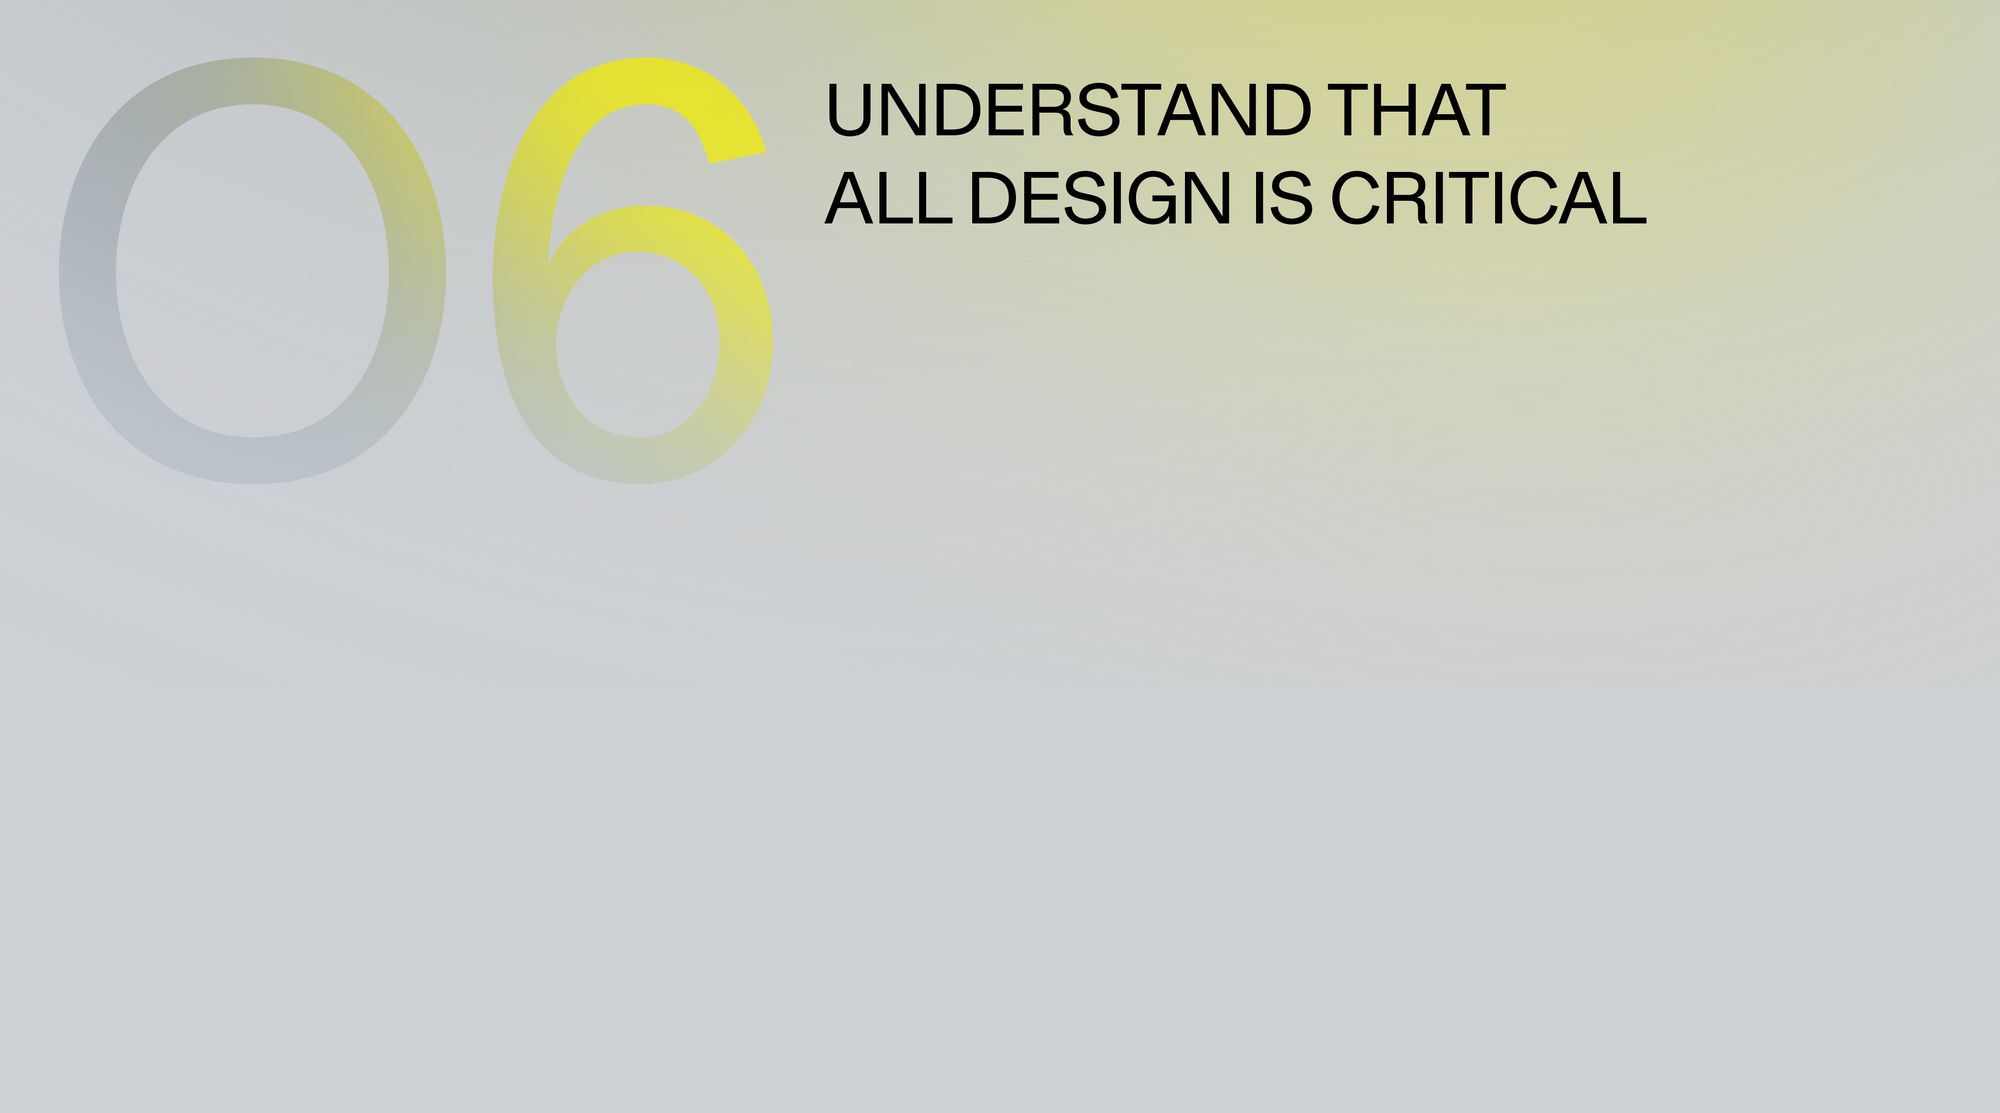 Understand that all design is critical.